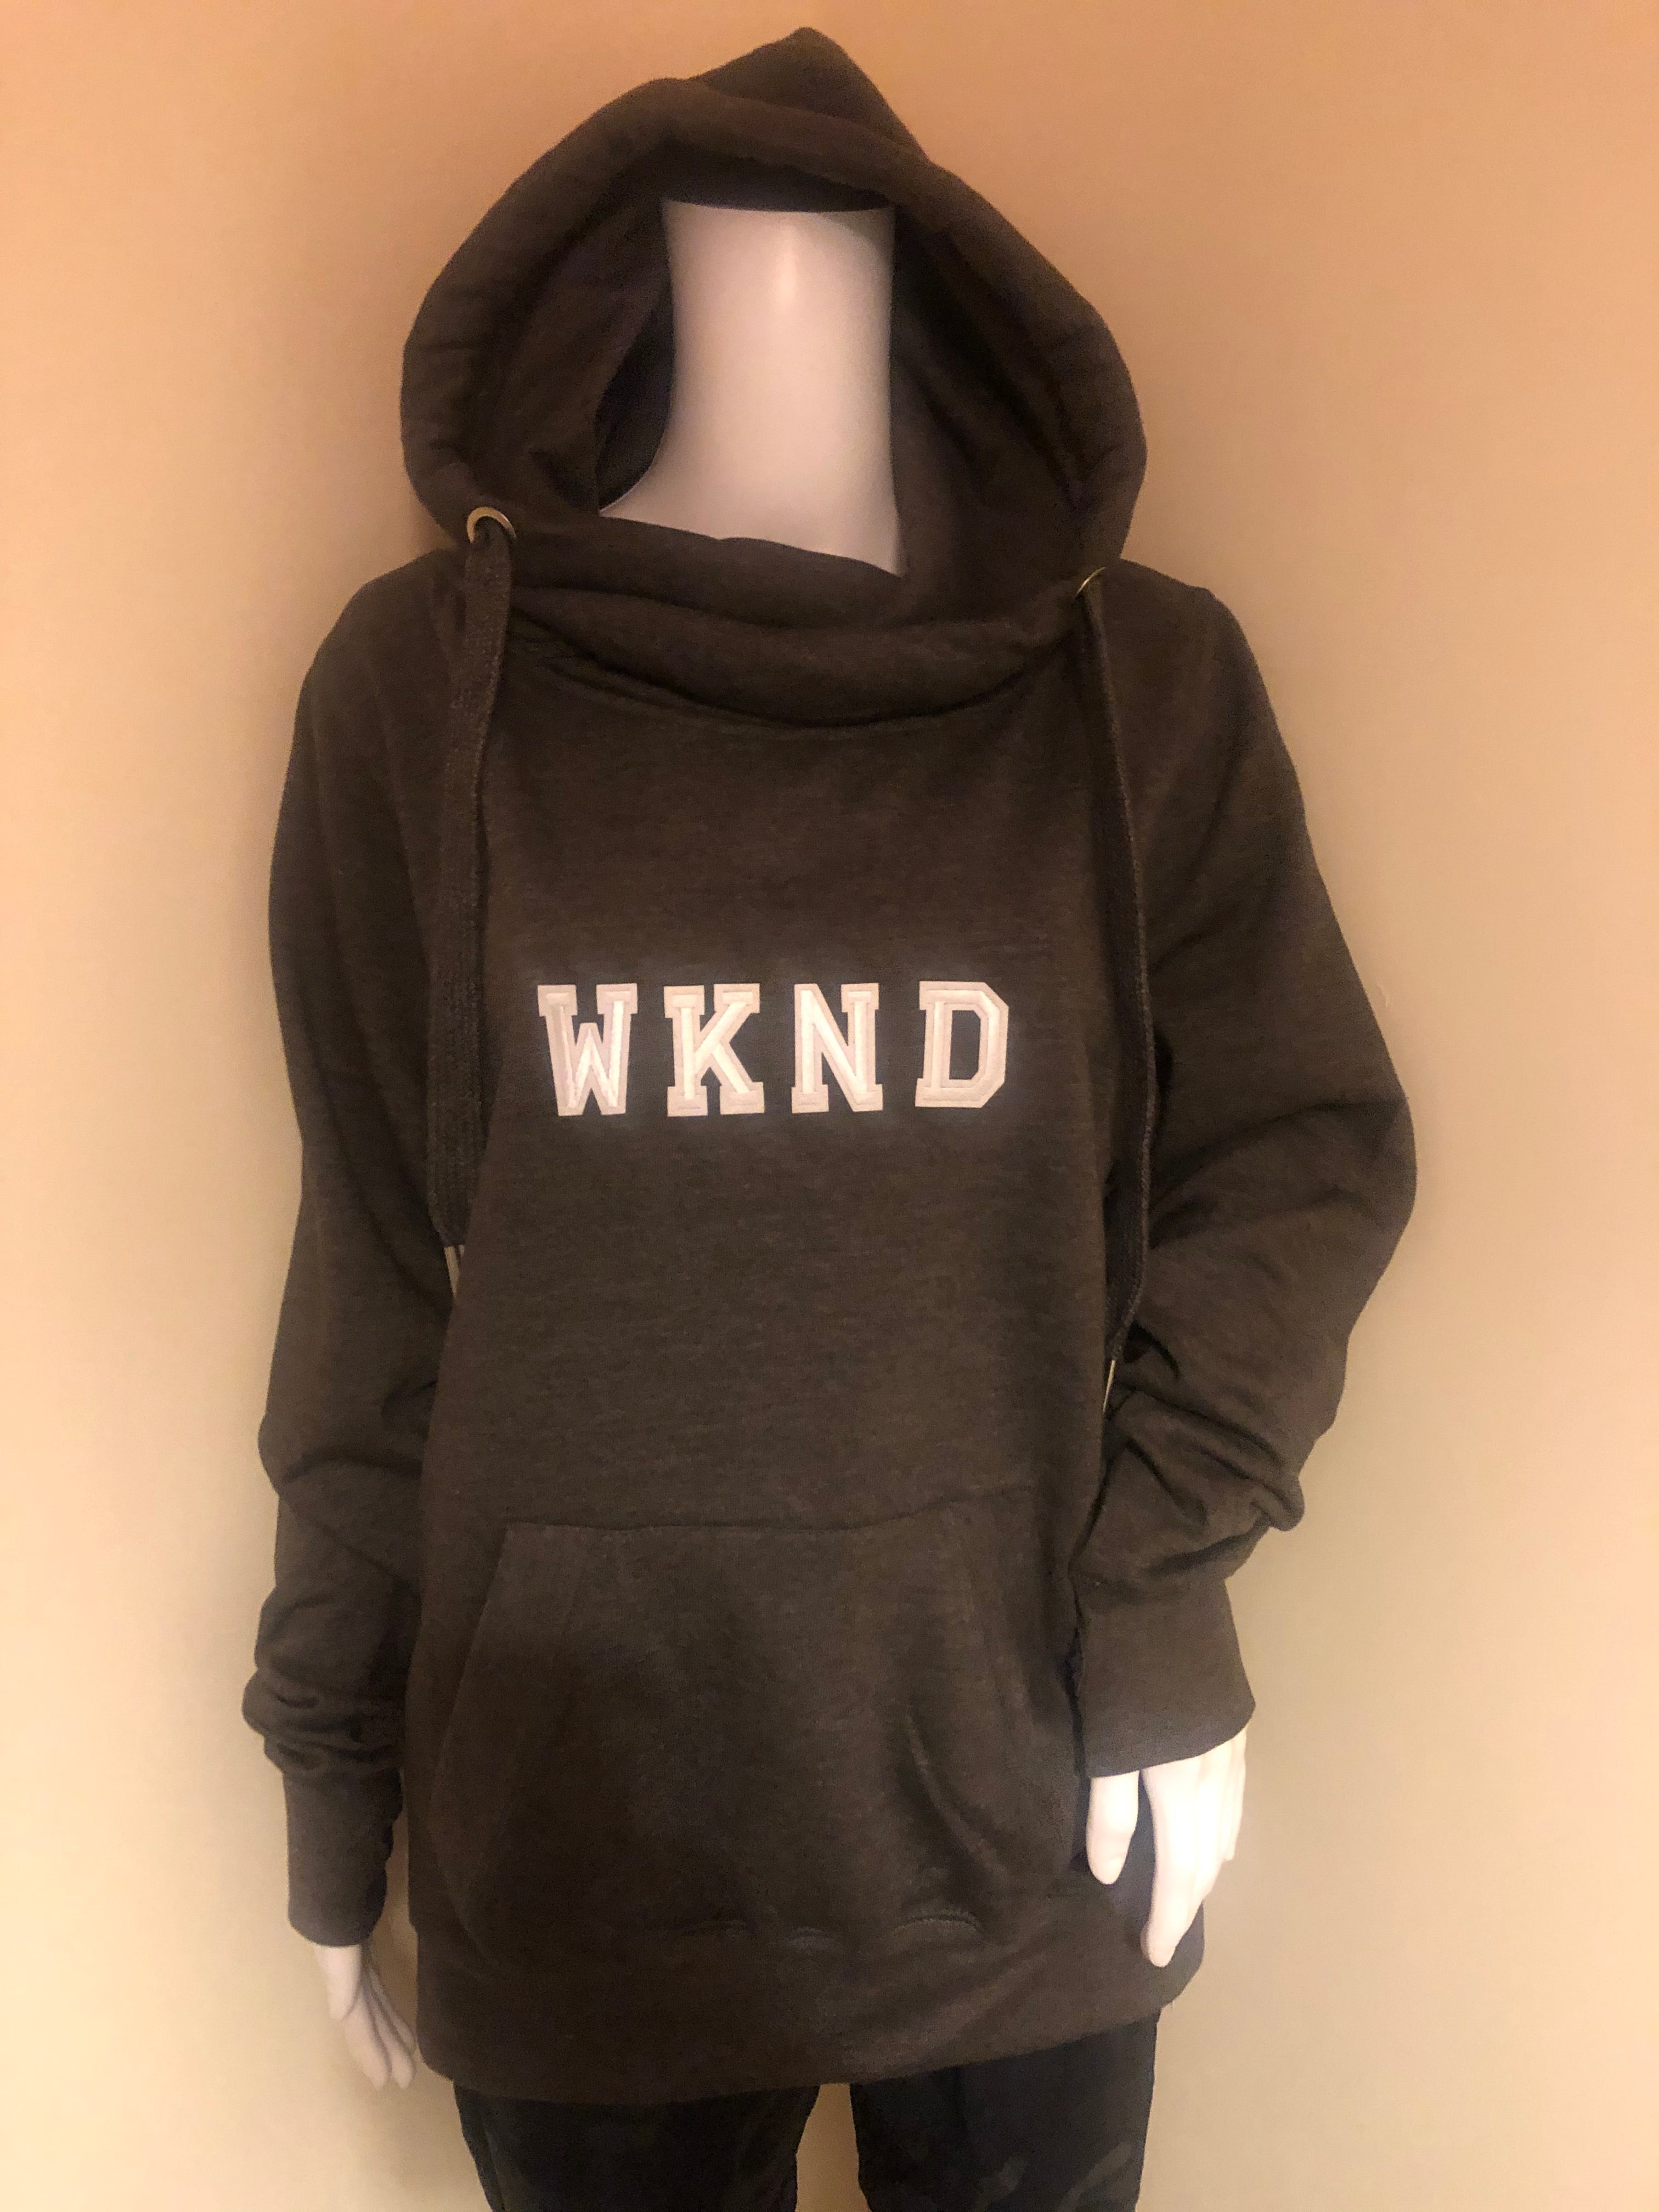 Liven Exclusive Crossover Neck Hoodie - Charcoal "WKND" Applique - Liven Boutique